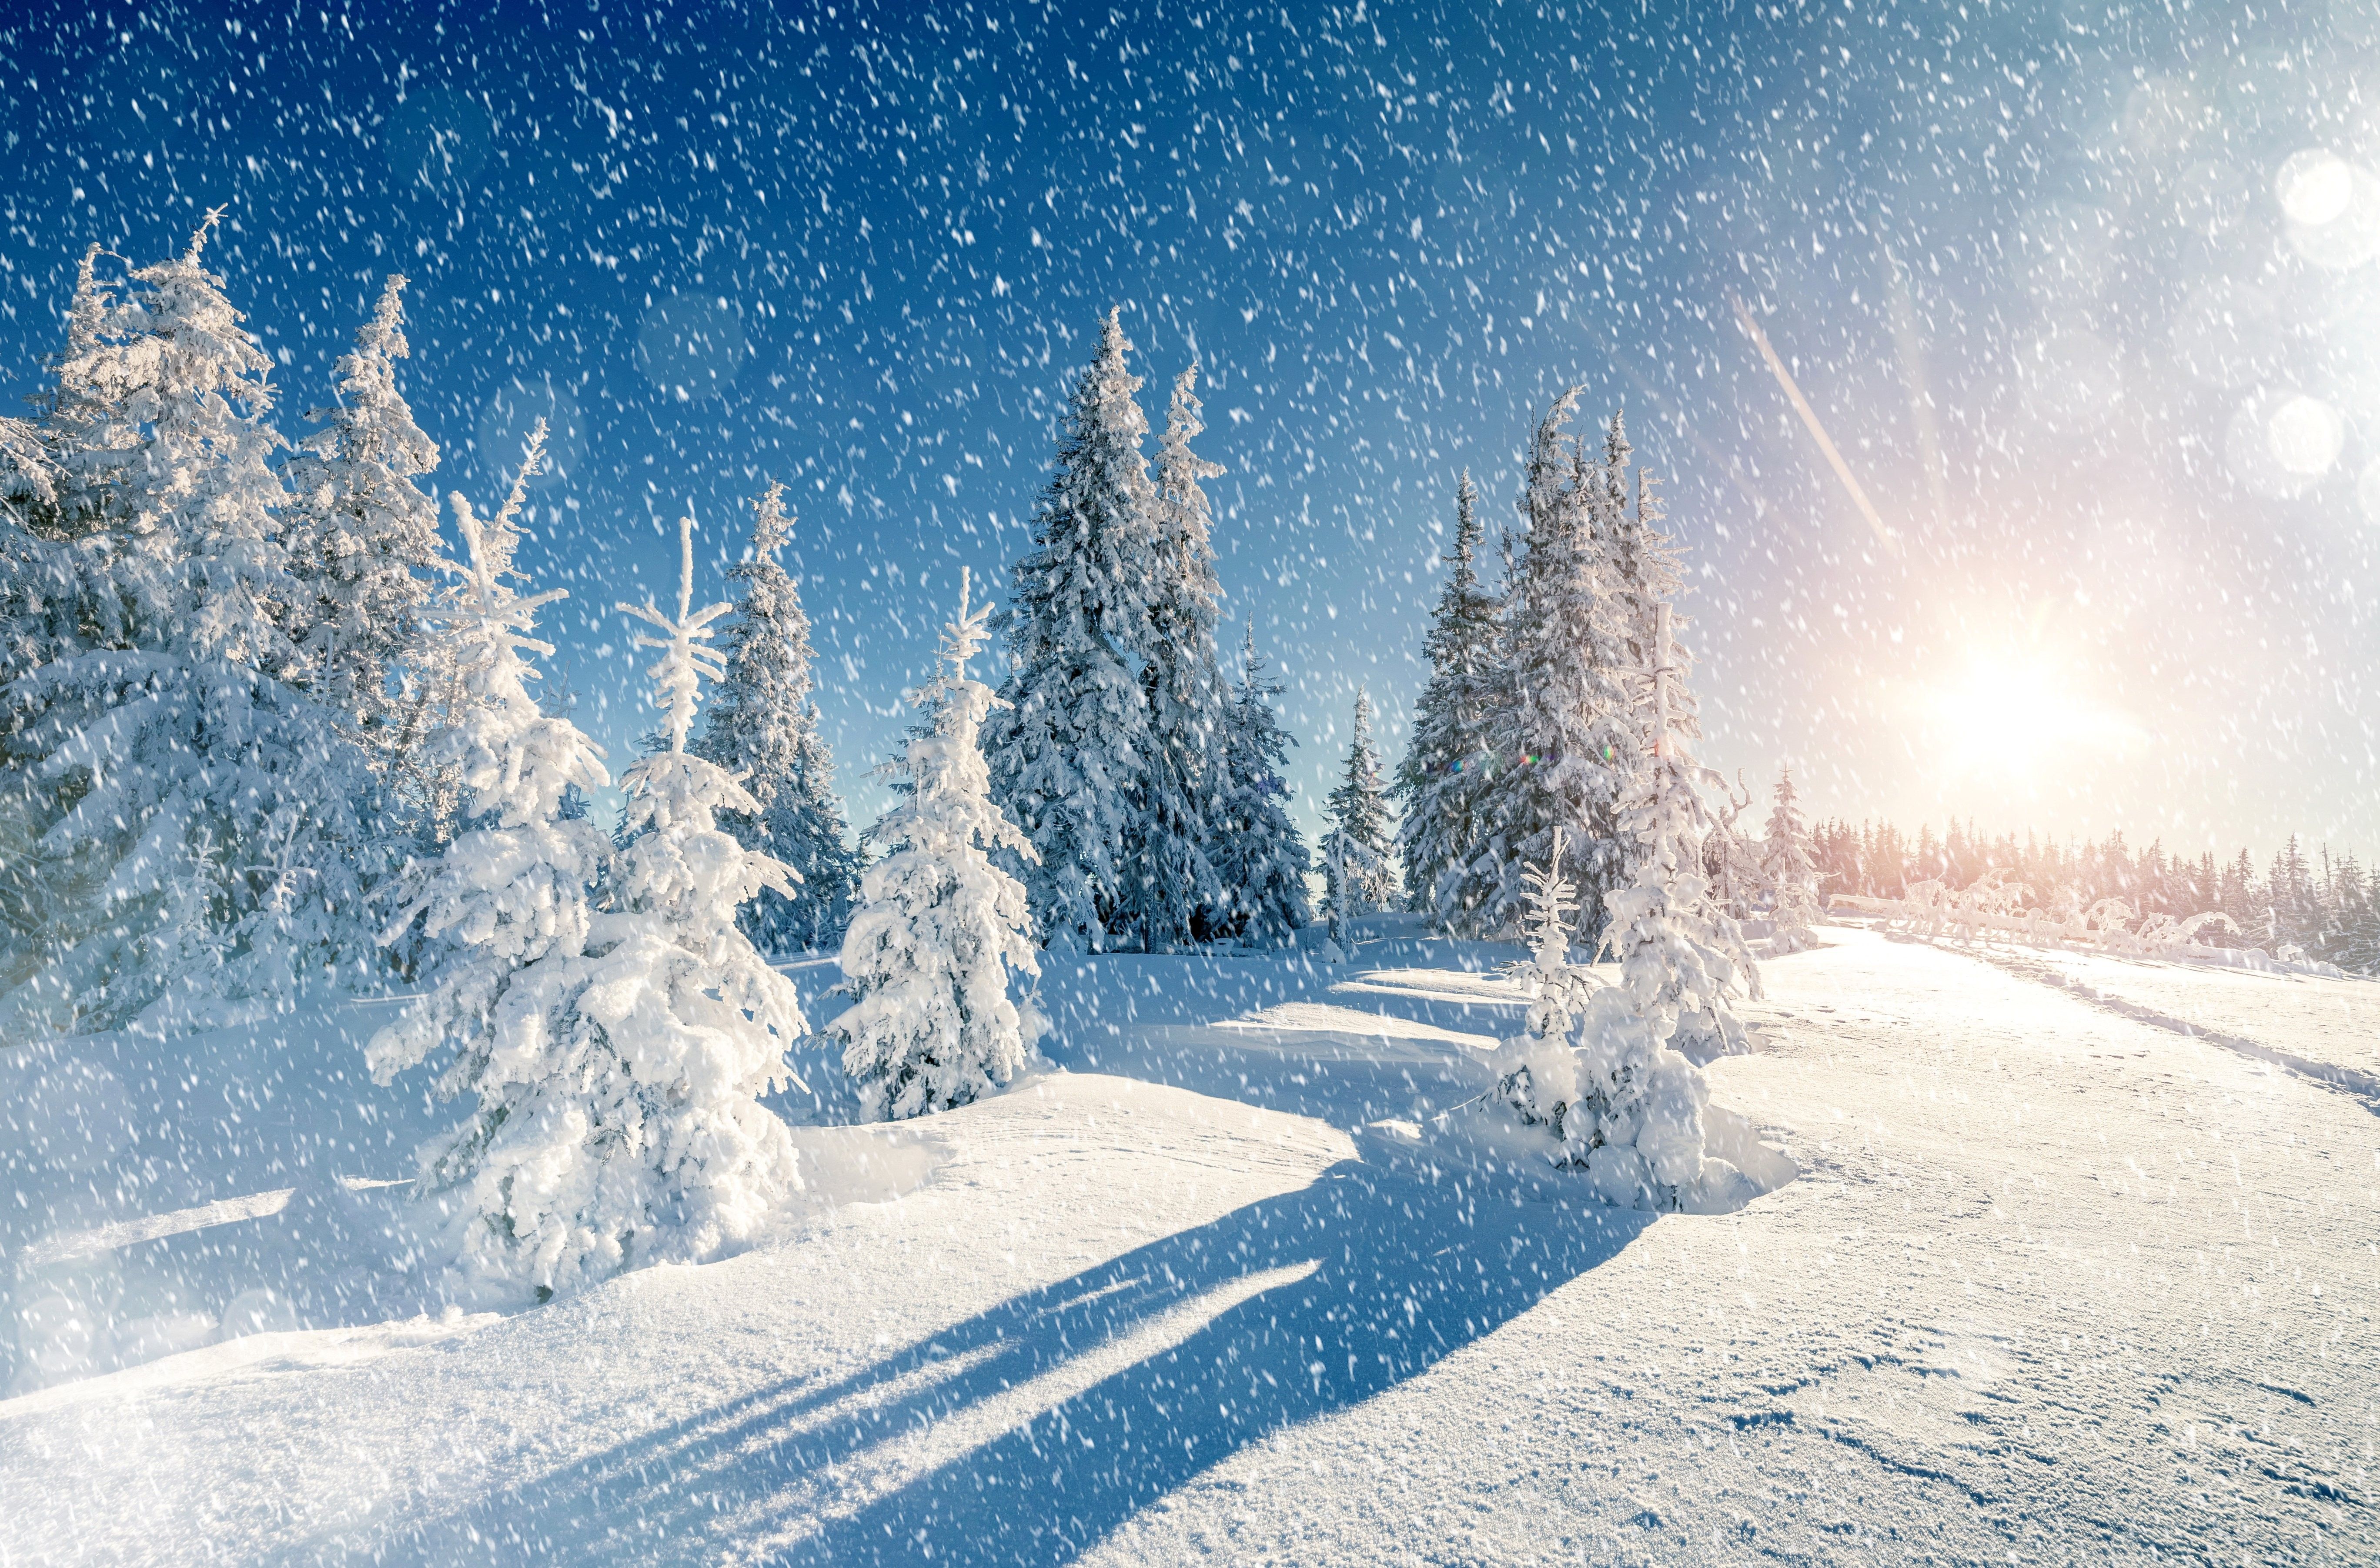 5472x3606 Background Image, Download, Fresh, winter, Landscape, Nature Abstract HD Wallpaper, Snow on WallpaperBat